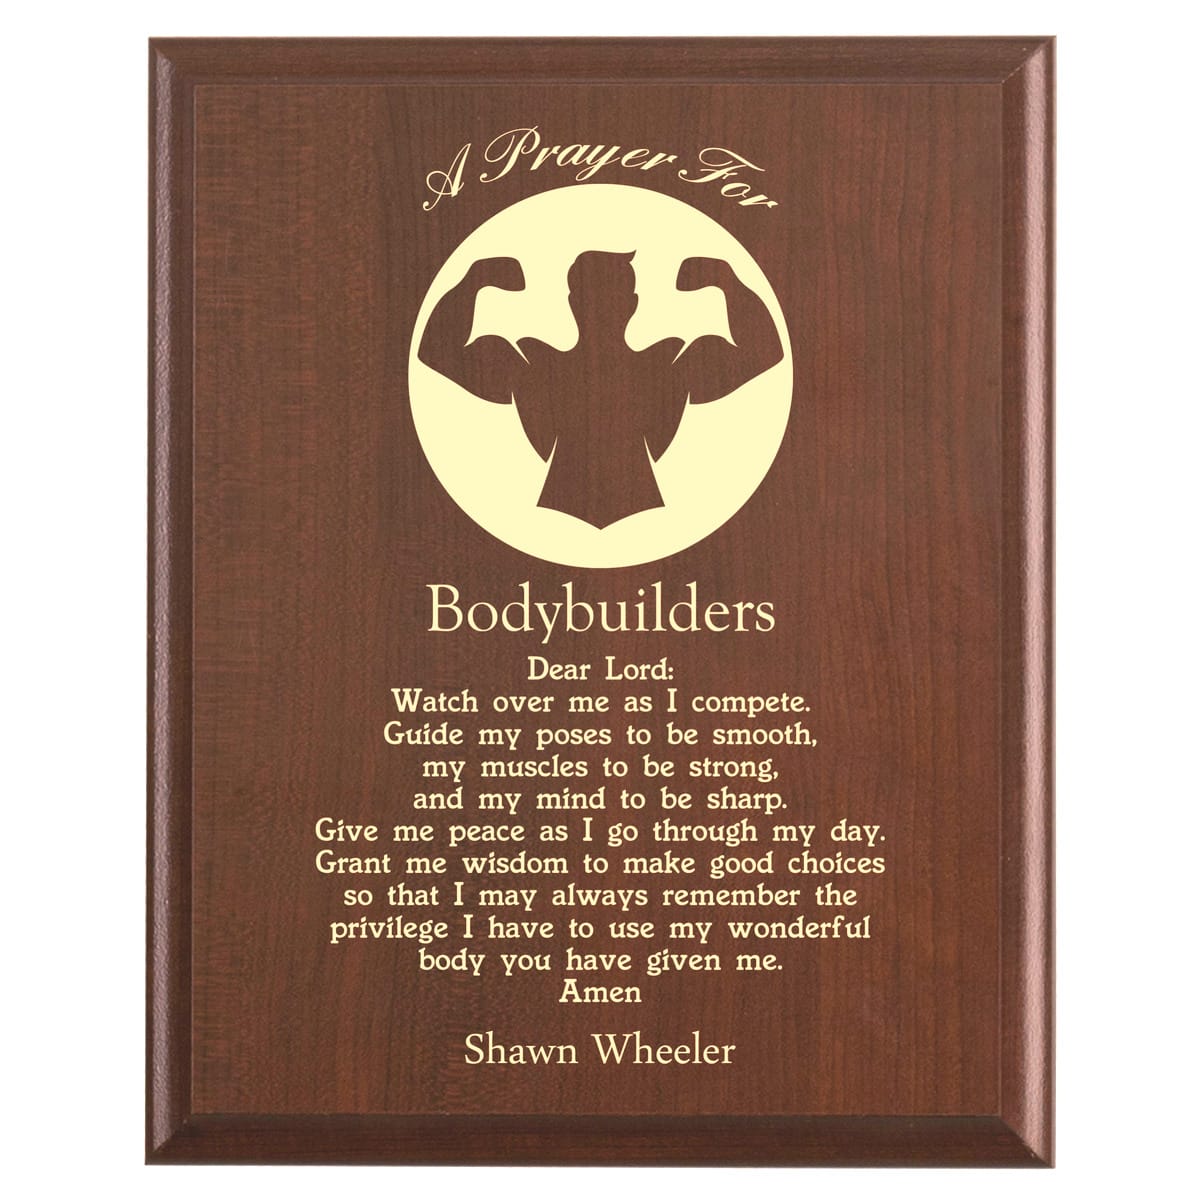 Plaque photo: Bodybuilding Prayer Plaque design with free personalization. Wood style finish with customized text.